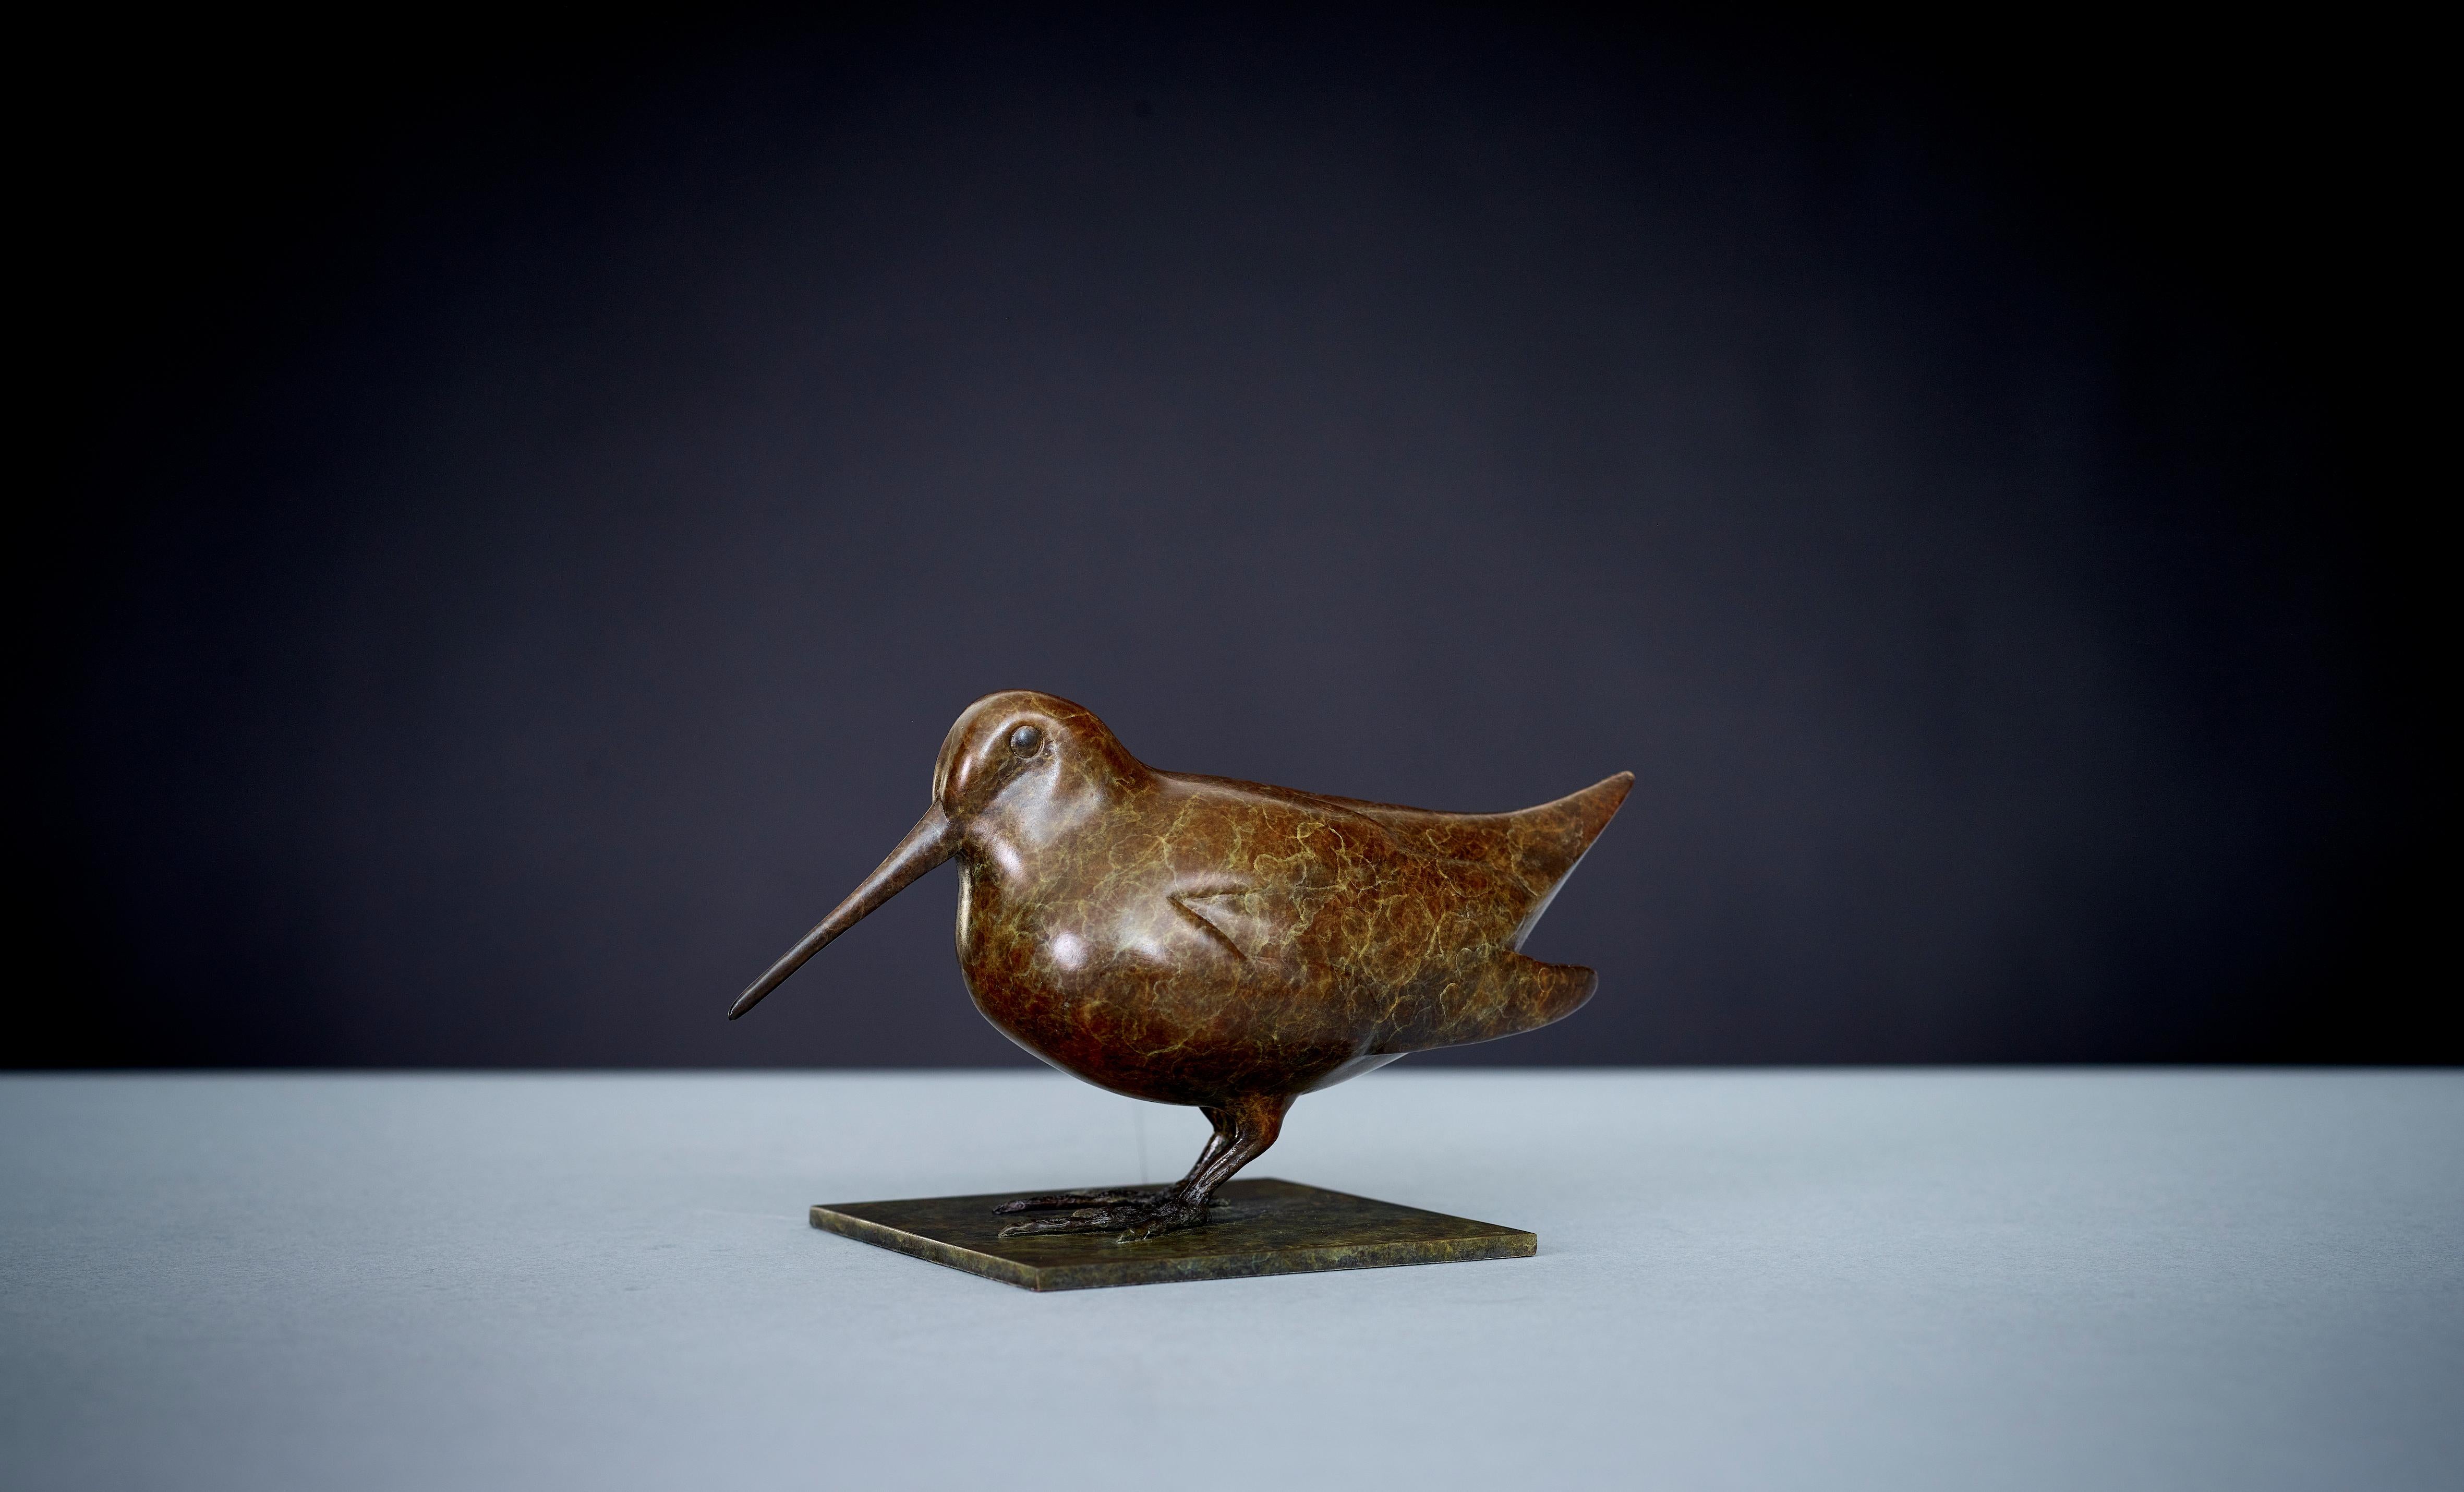 Richard Smith b.1955 Figurative Sculpture - Contemporary Wildlife Sculpture of a Water Bird 'Woodcock' by Richard Smith 